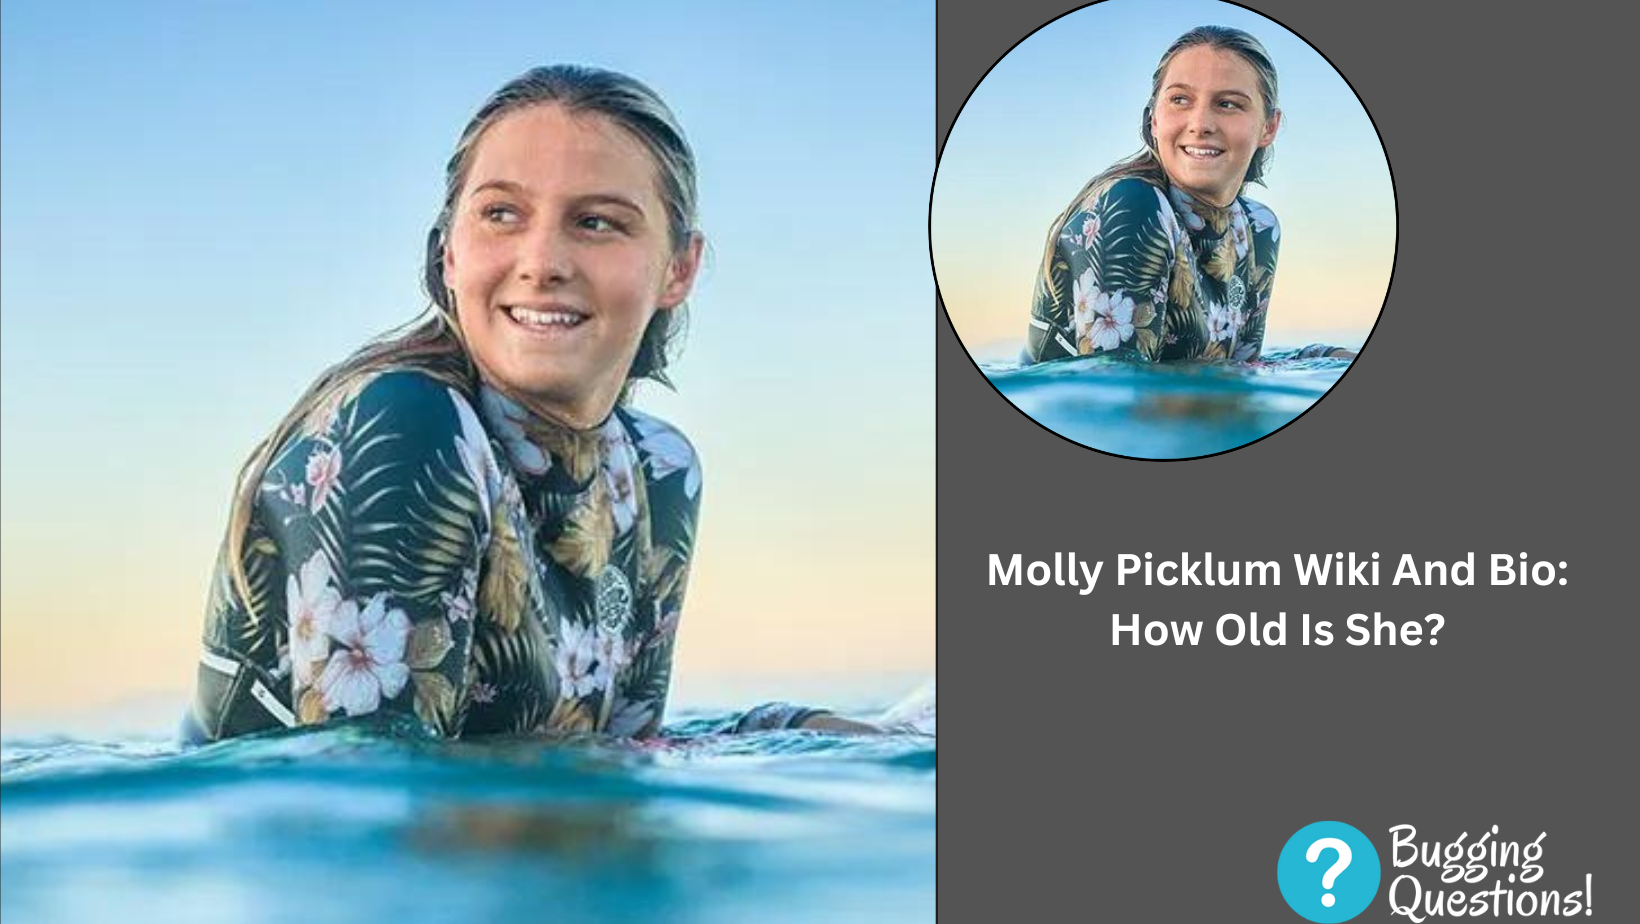 Molly Picklum Wiki And Bio: How Old Is She?